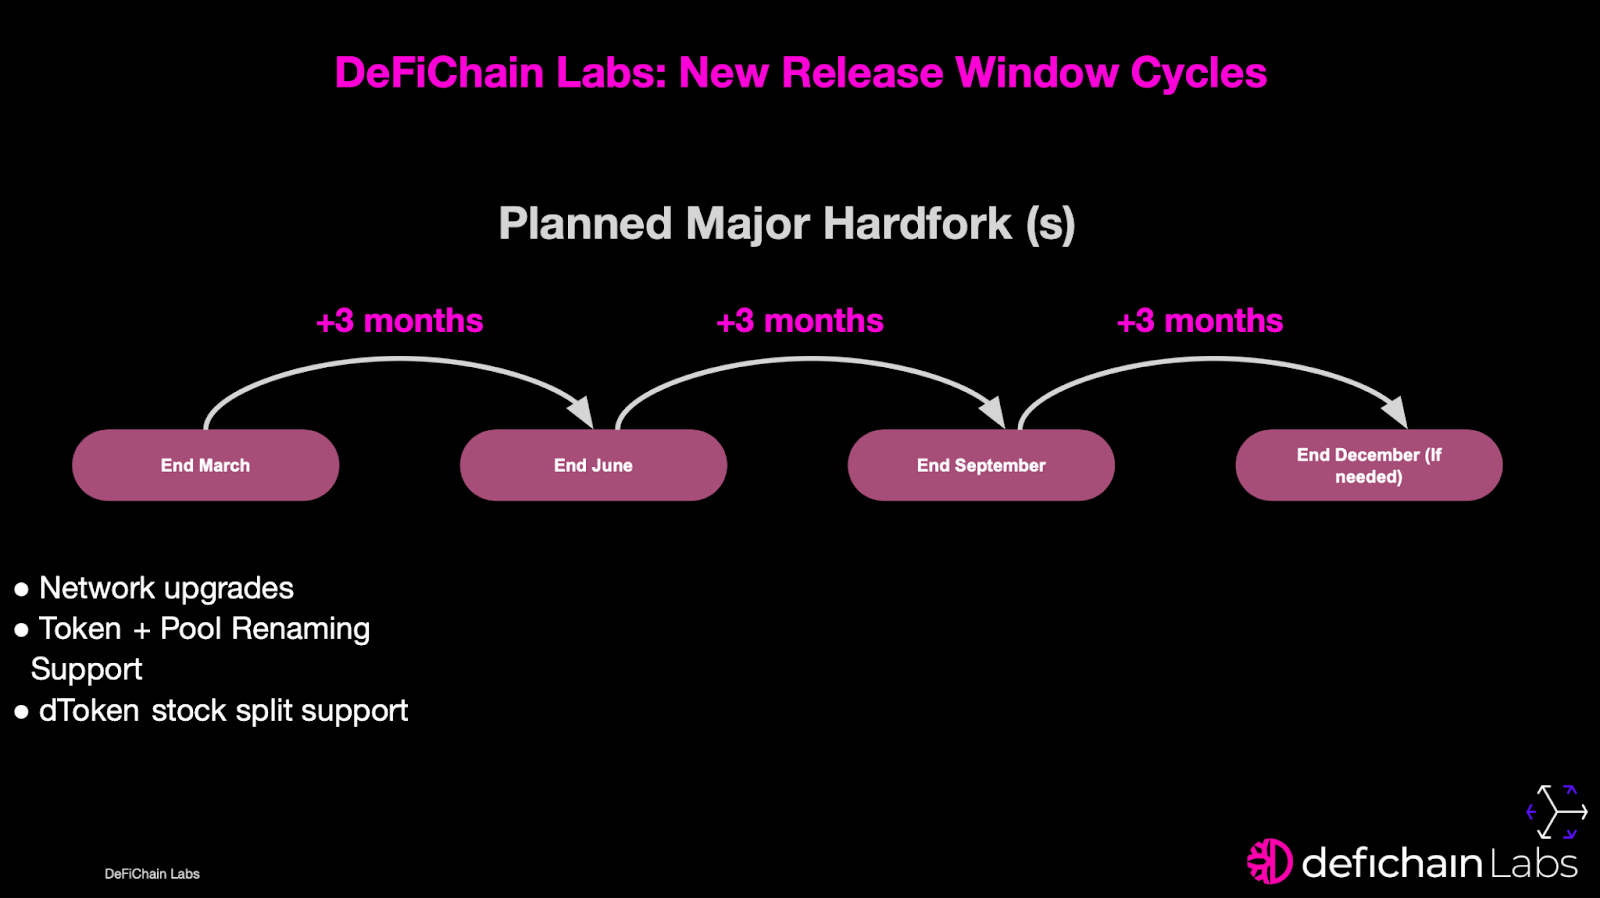 DeFiChain Implements New Hardfork Schedule for More Predictability